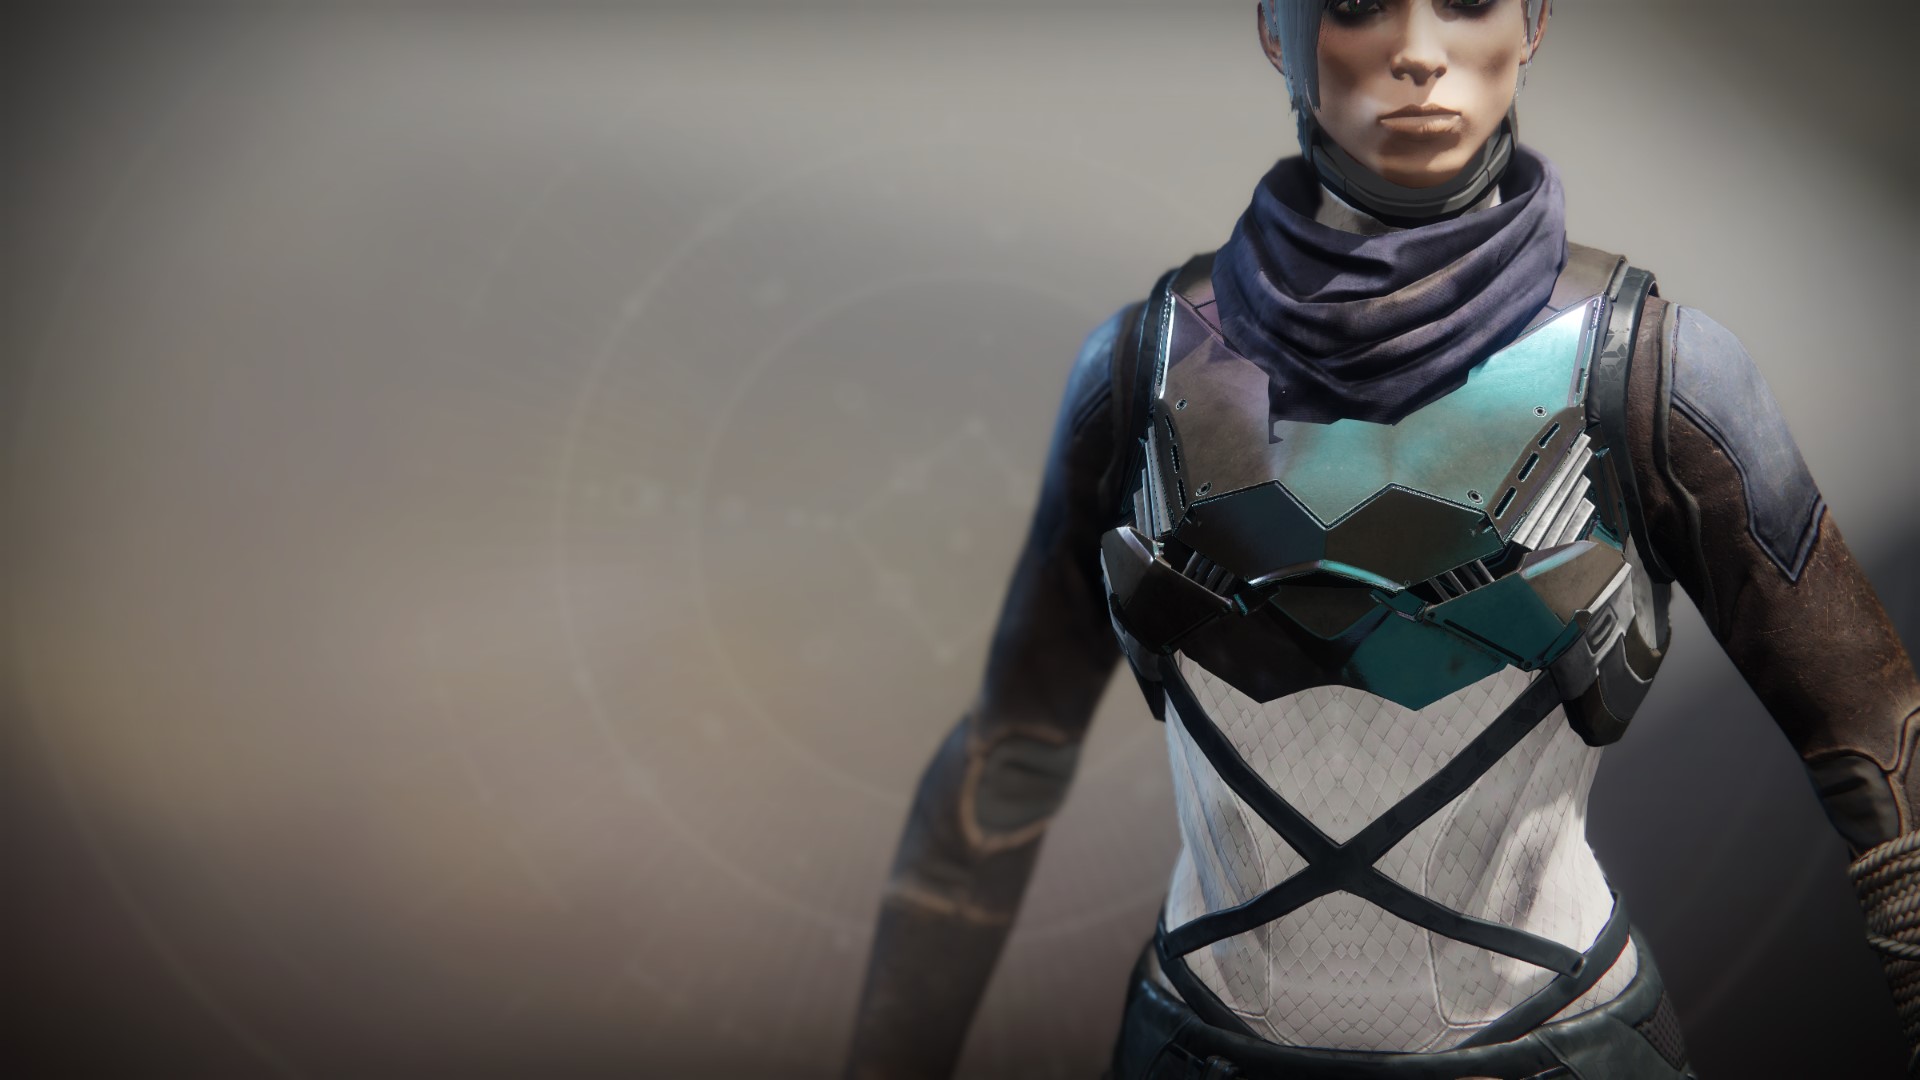 An in-game render of the Flowing Vest (CODA).